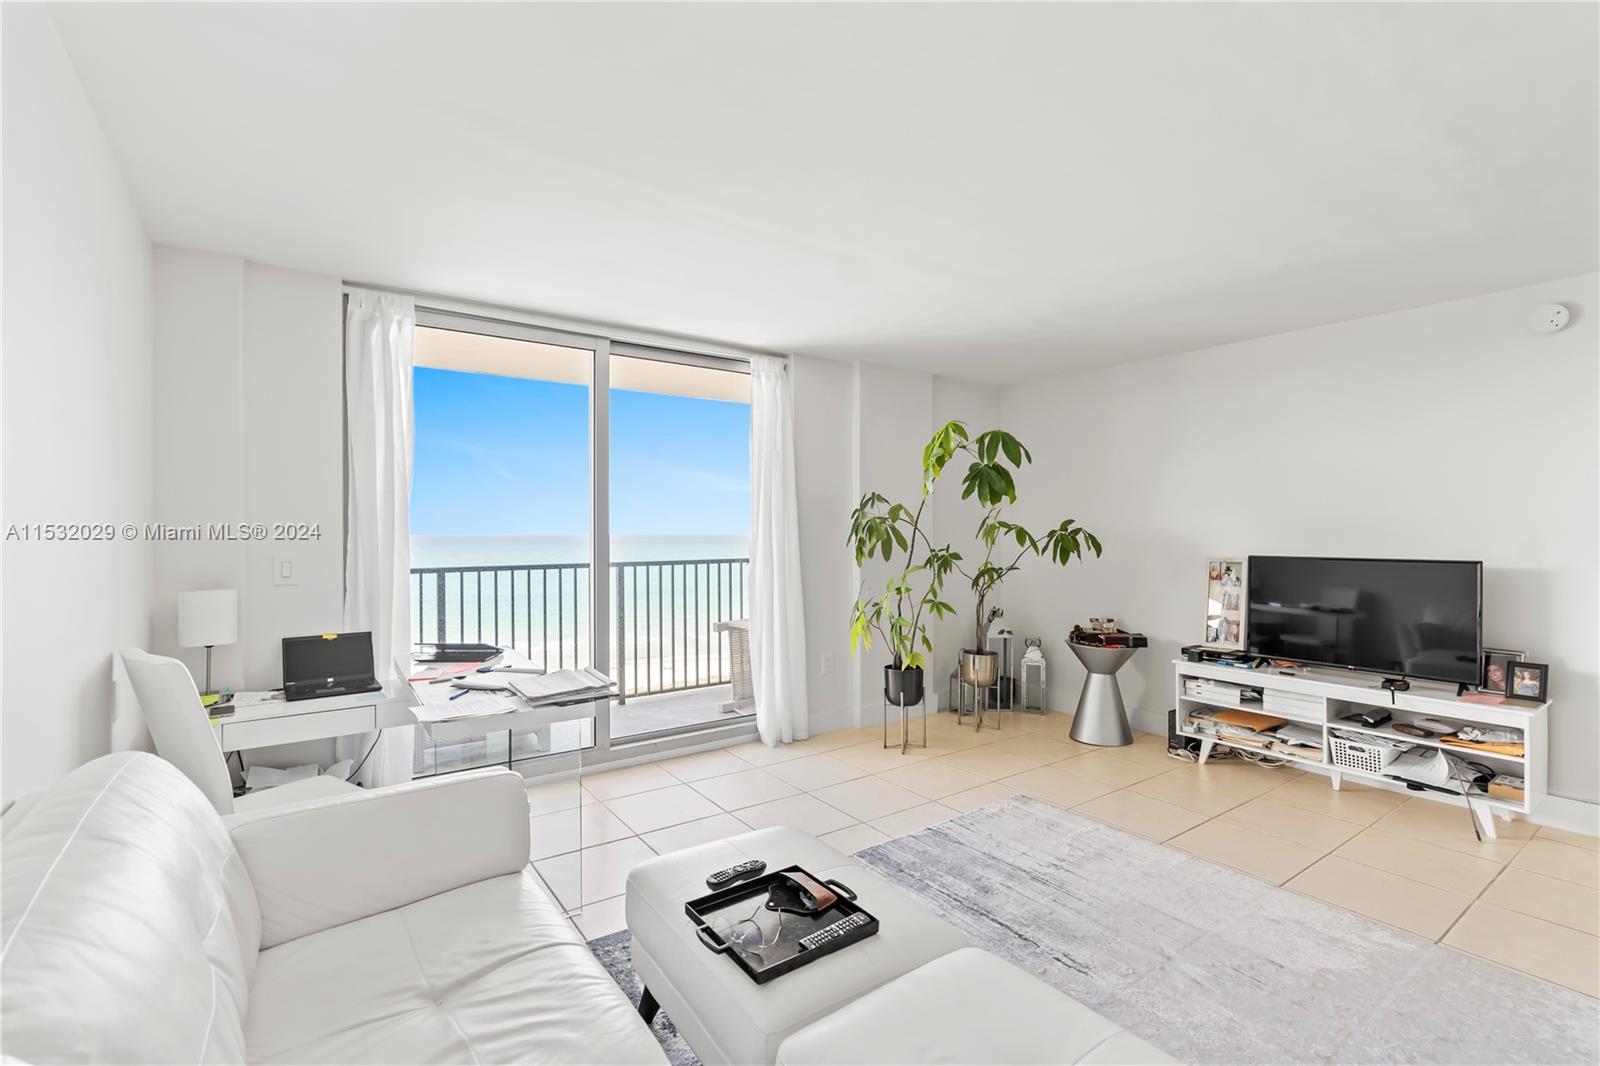 Experience spectacular direct ocean and beach views from this spacious 1-bed/2-bath apartment. Enjoy